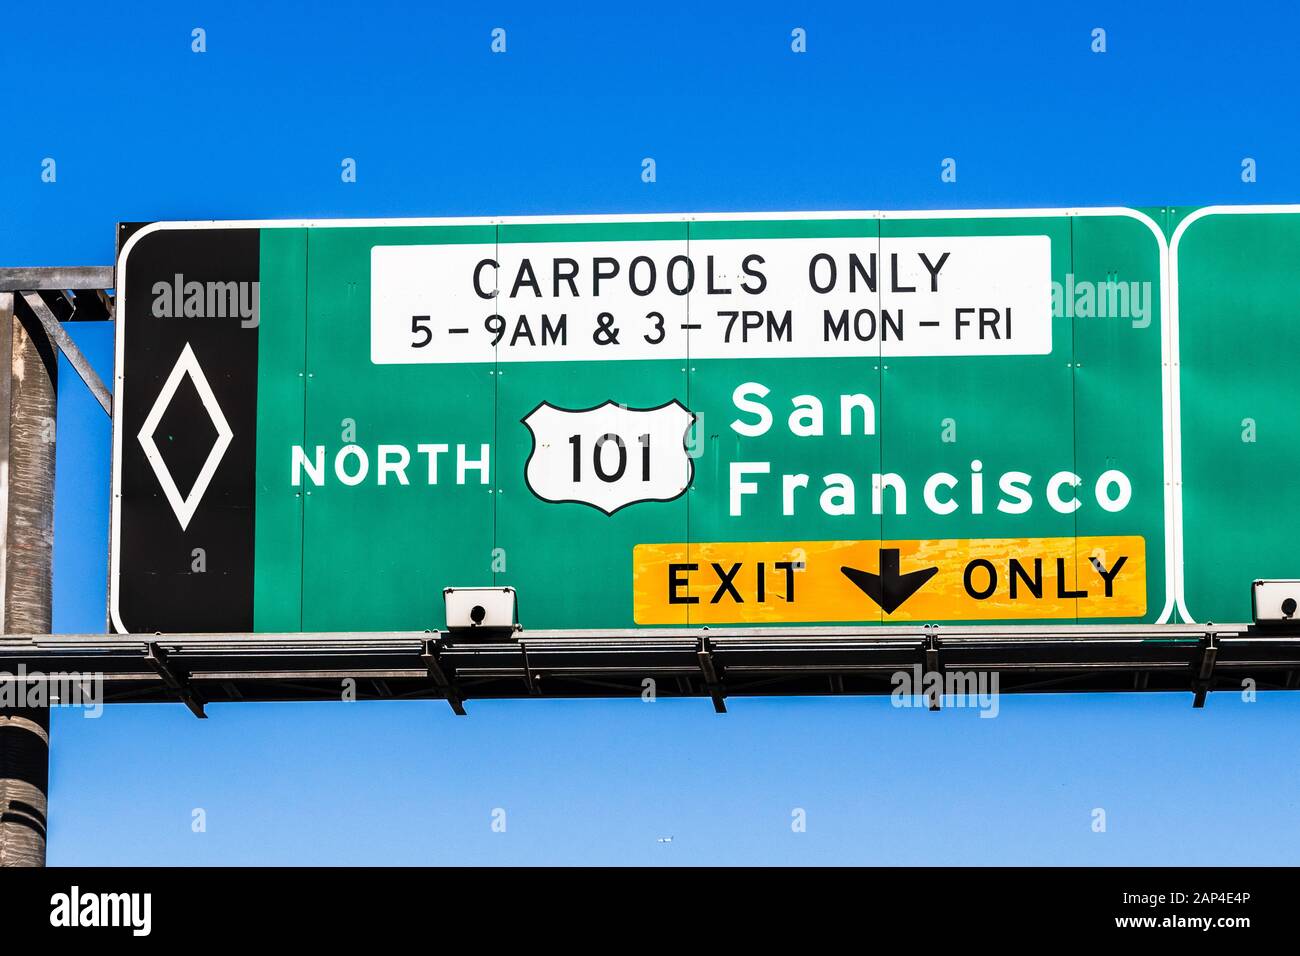 Freeway 101 northbound to San Francisco signage providing directions and the applicable carpool rules; San Francisco bay area, California Stock Photo